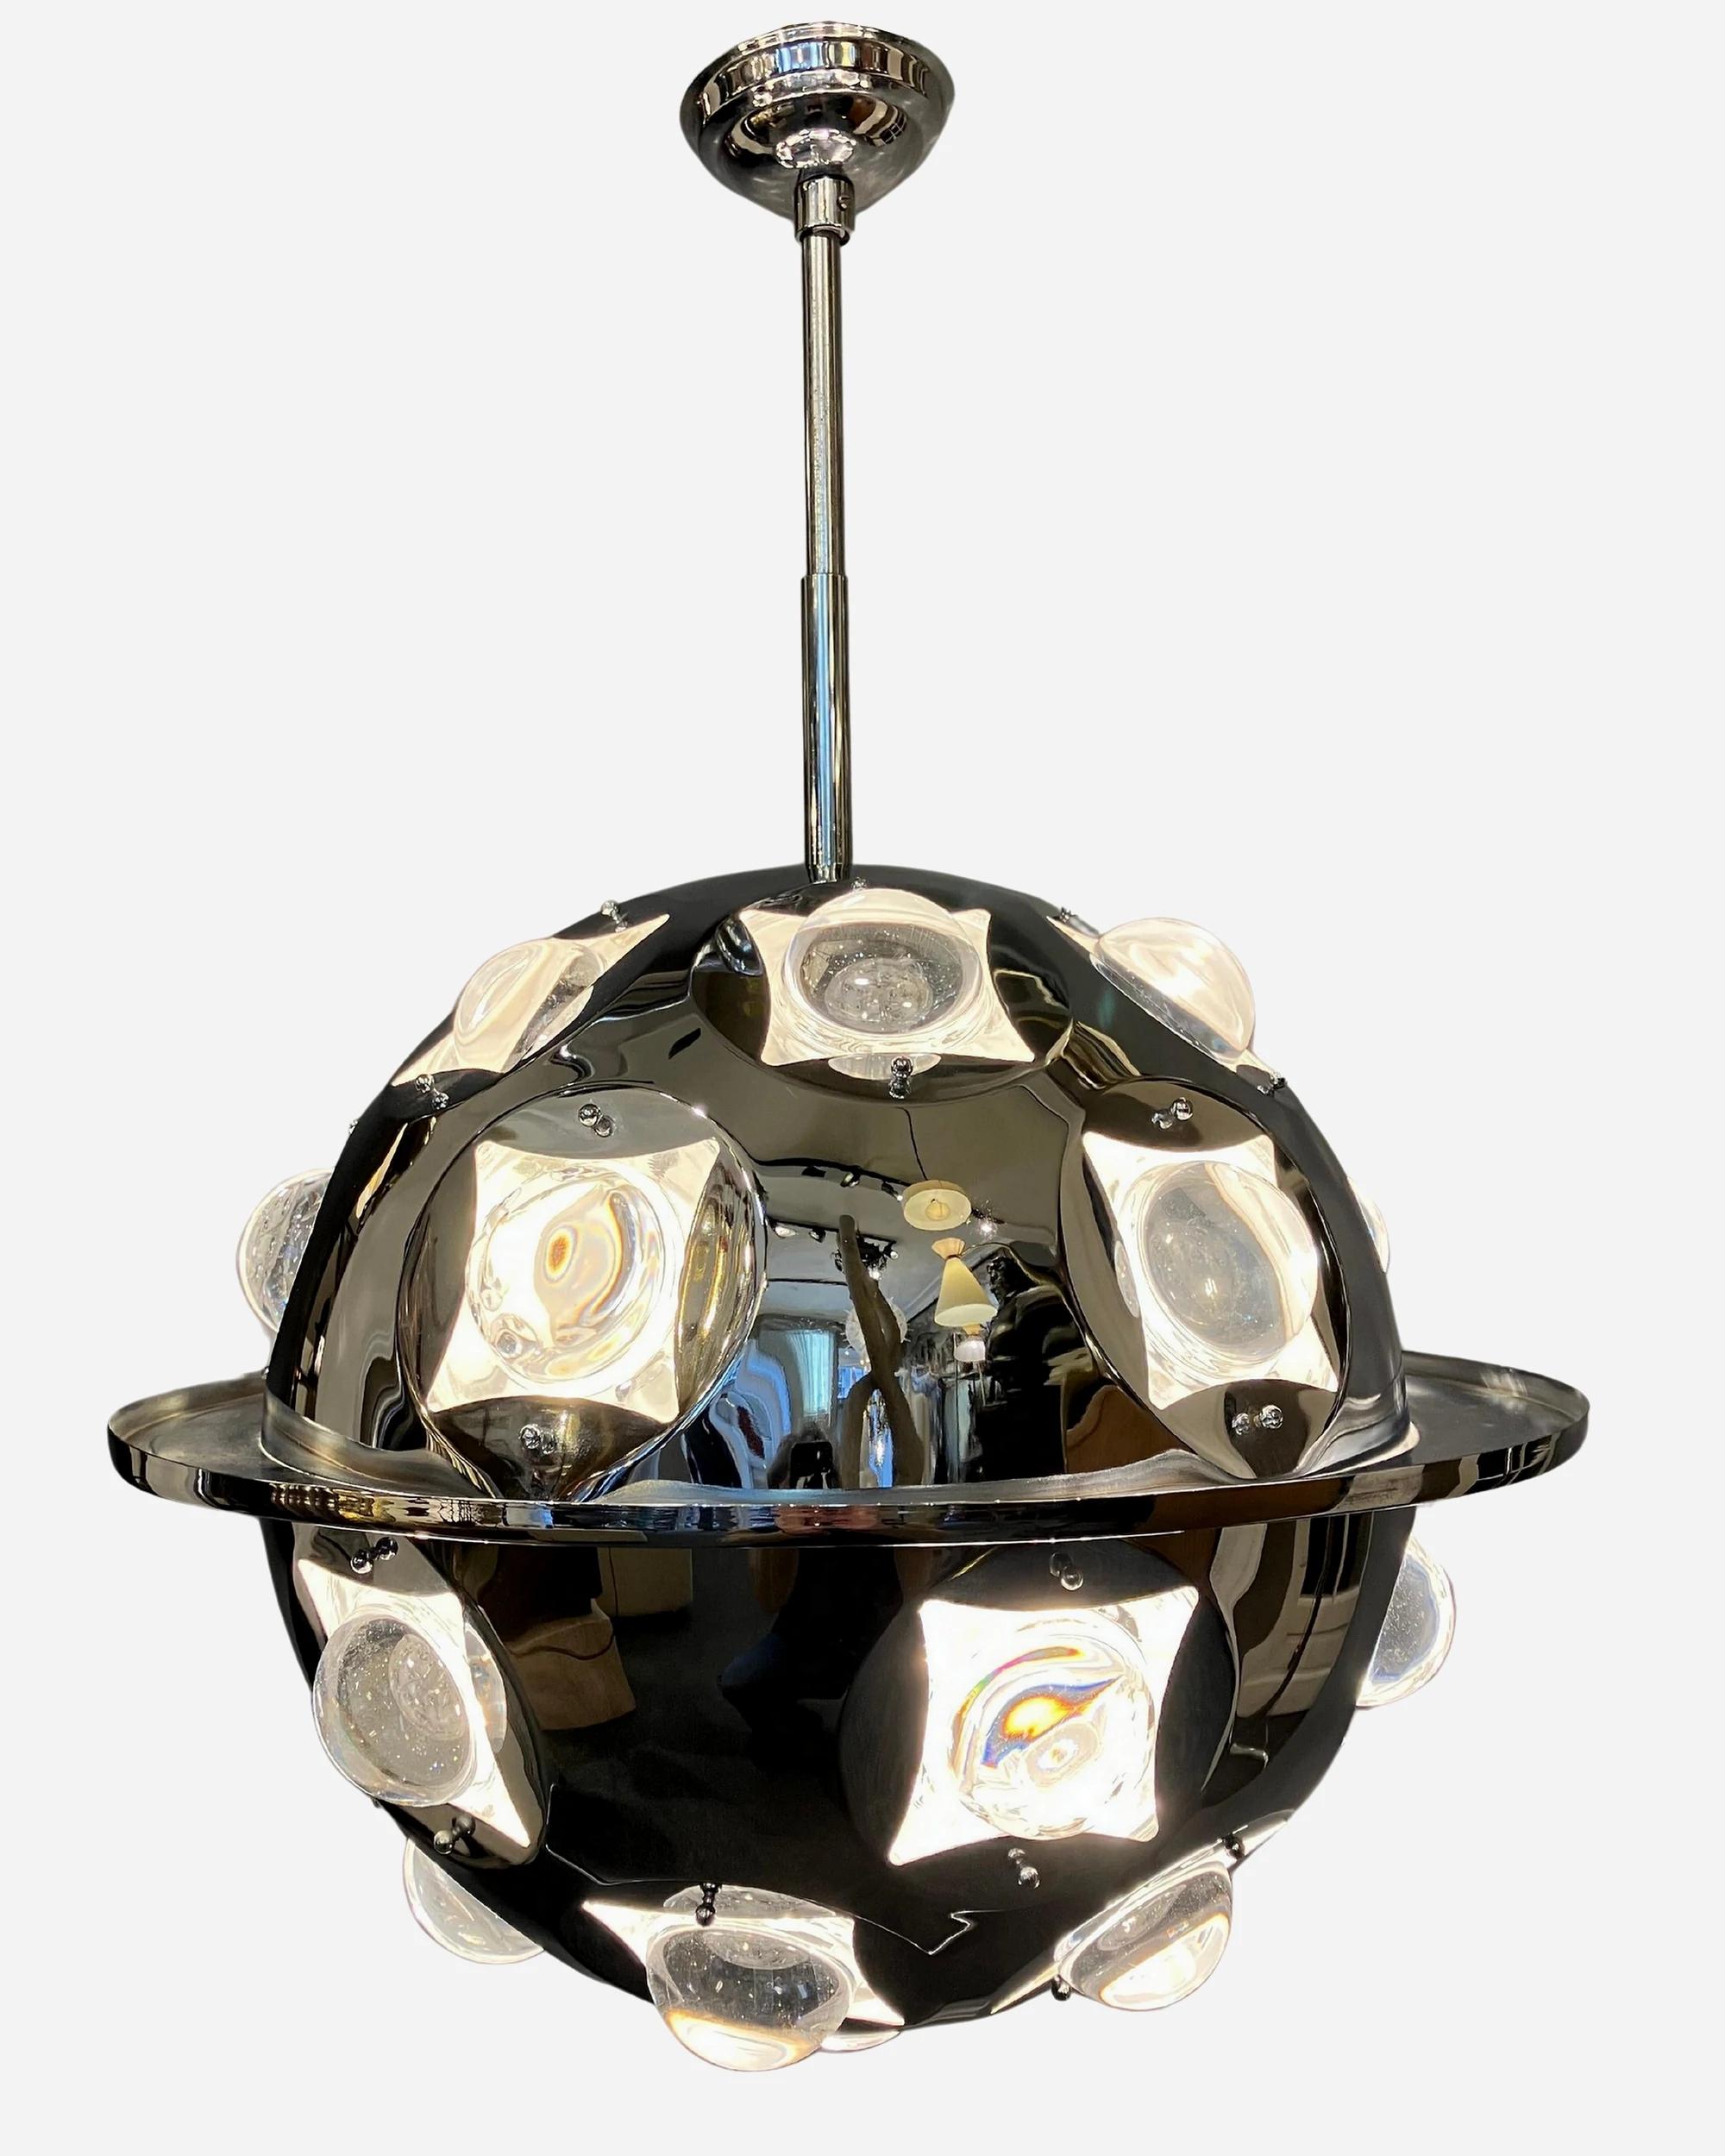 Sputnik chandelier designed by Oscar Torlasco, for LUMI Italy, in the 1960s. Chrome-plated structure with optical glass lenses that reflect light in all directions. In very good original condition.

Price is indicated for each item.